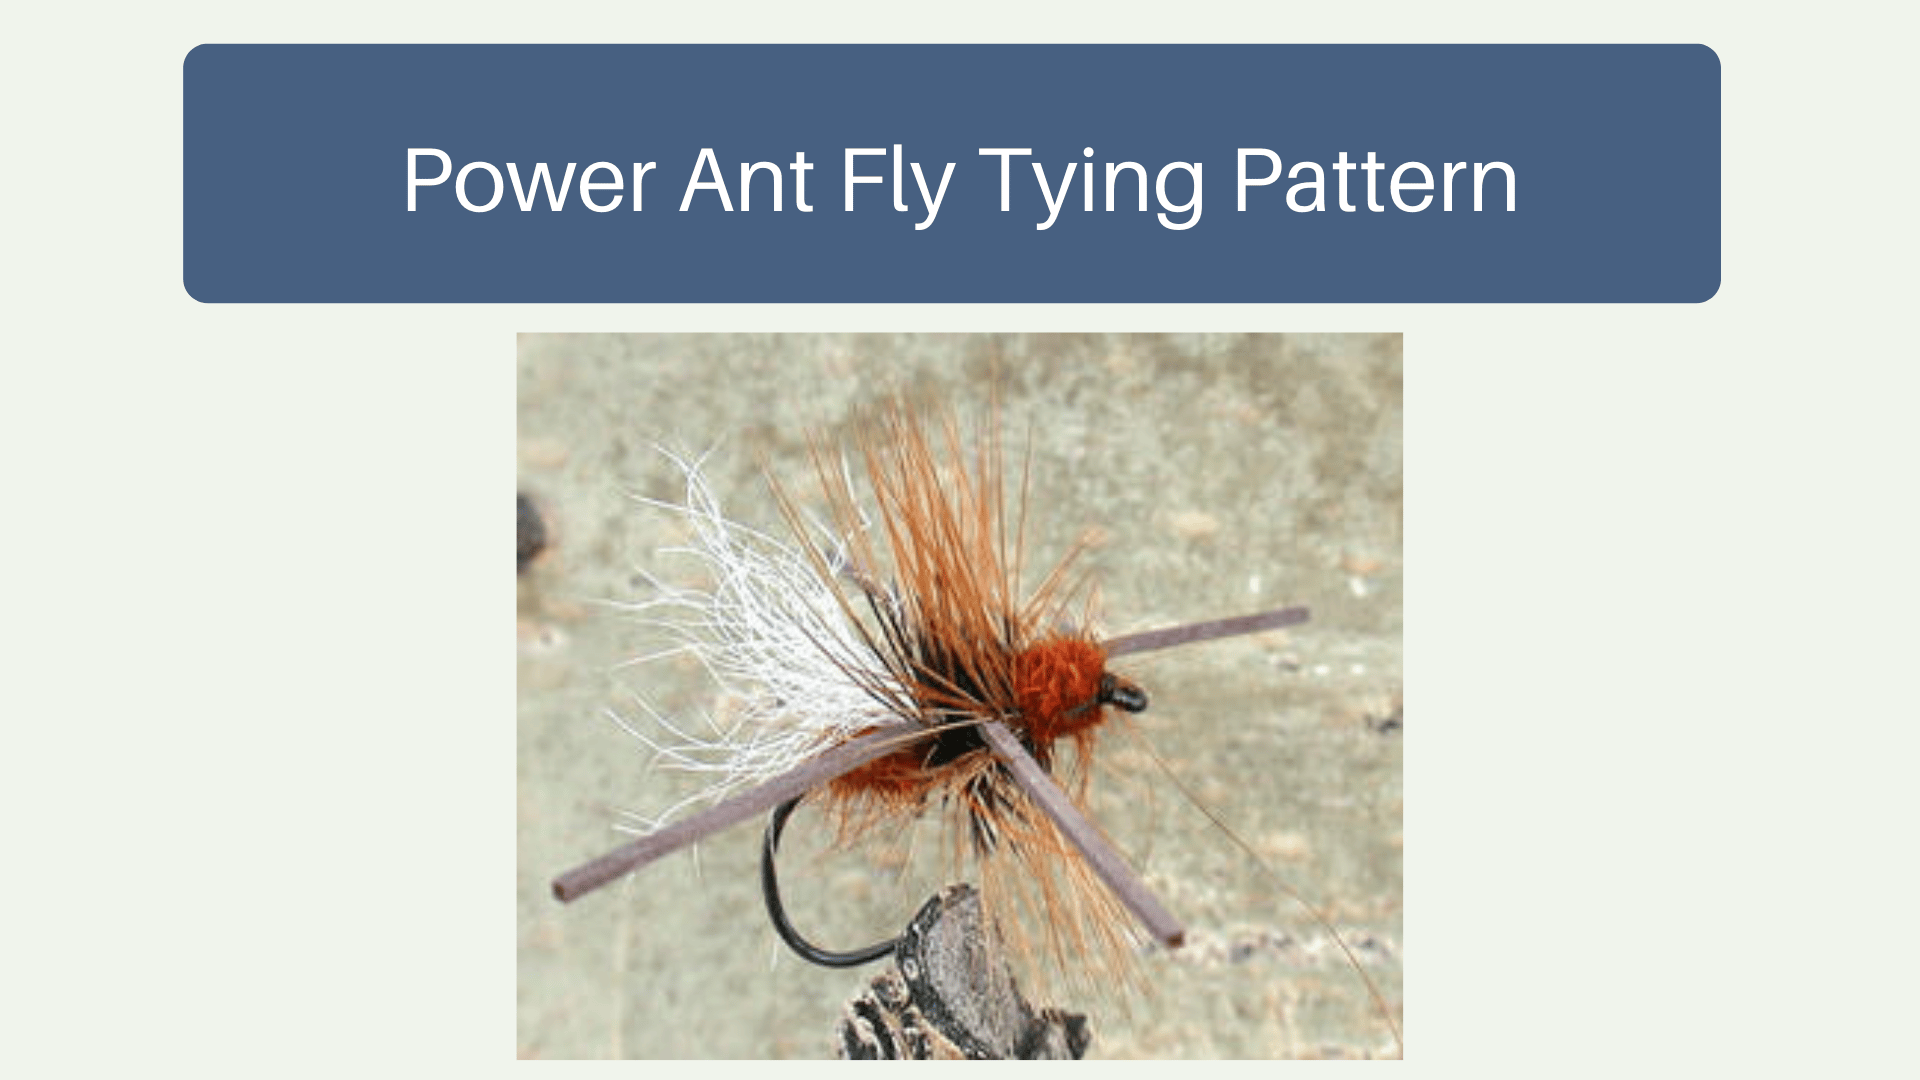 Power Ant Fly Tying Pattern